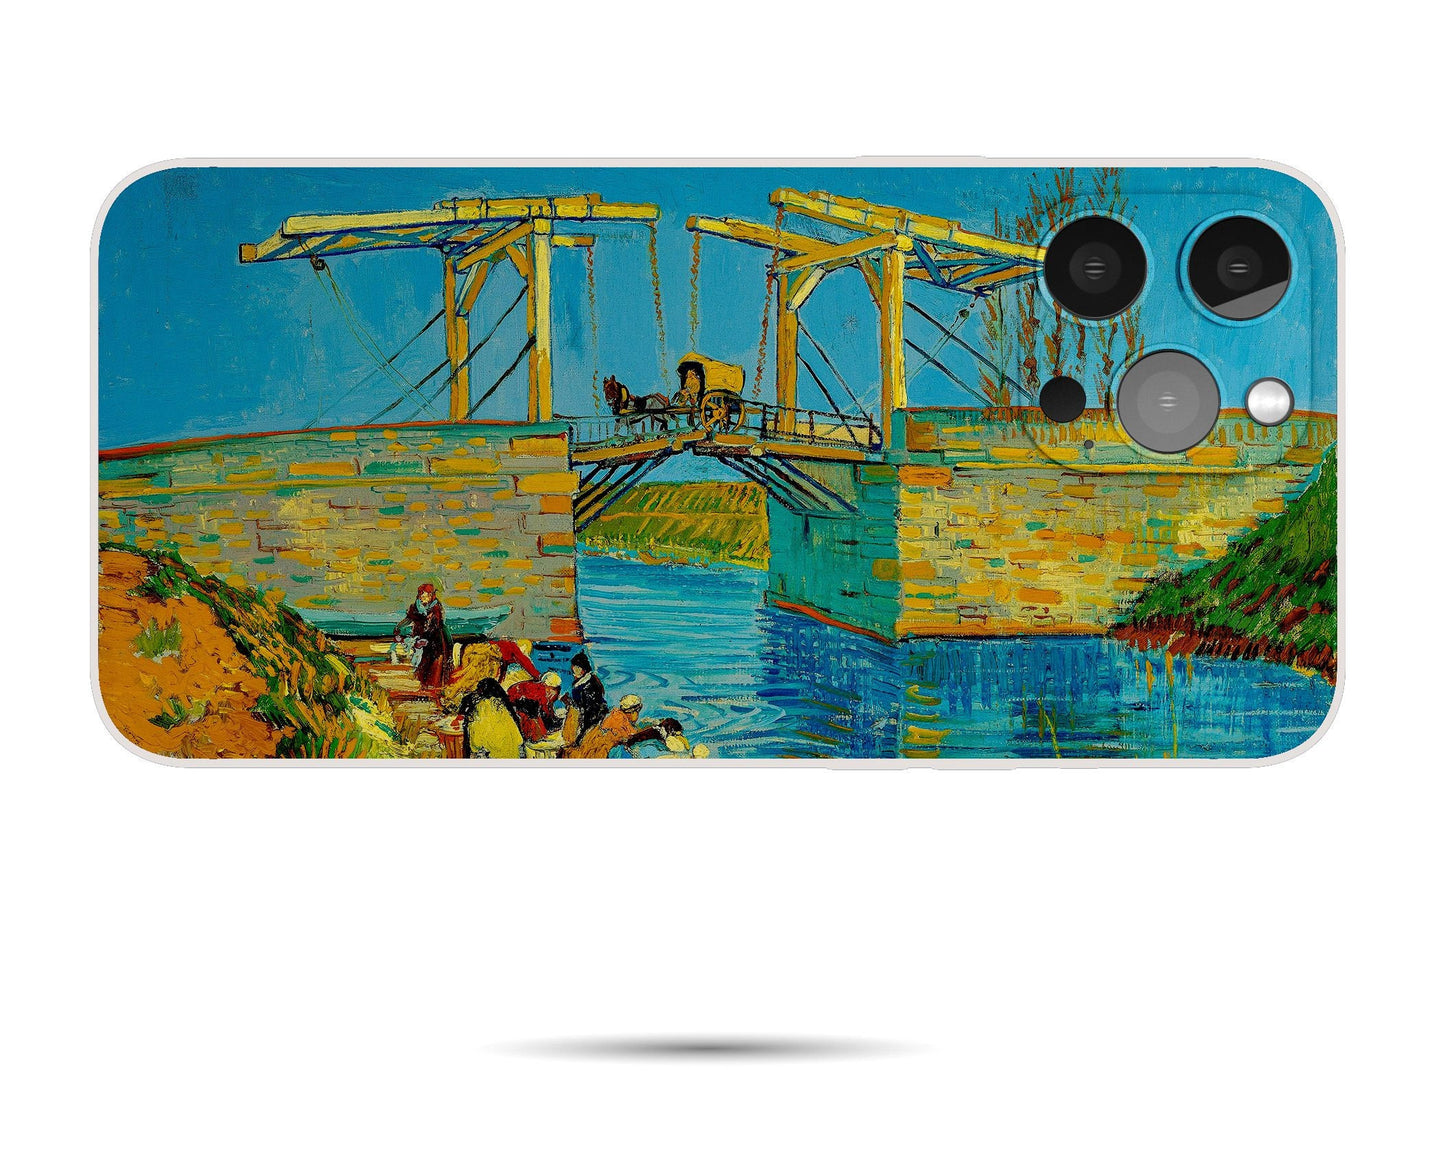 Vincent Van Gogh The Langlois Bridge At Arles With Women Washing Iphone Cover, Iphone 13, Iphone 8 Plus Case Art, Designer Iphone Case